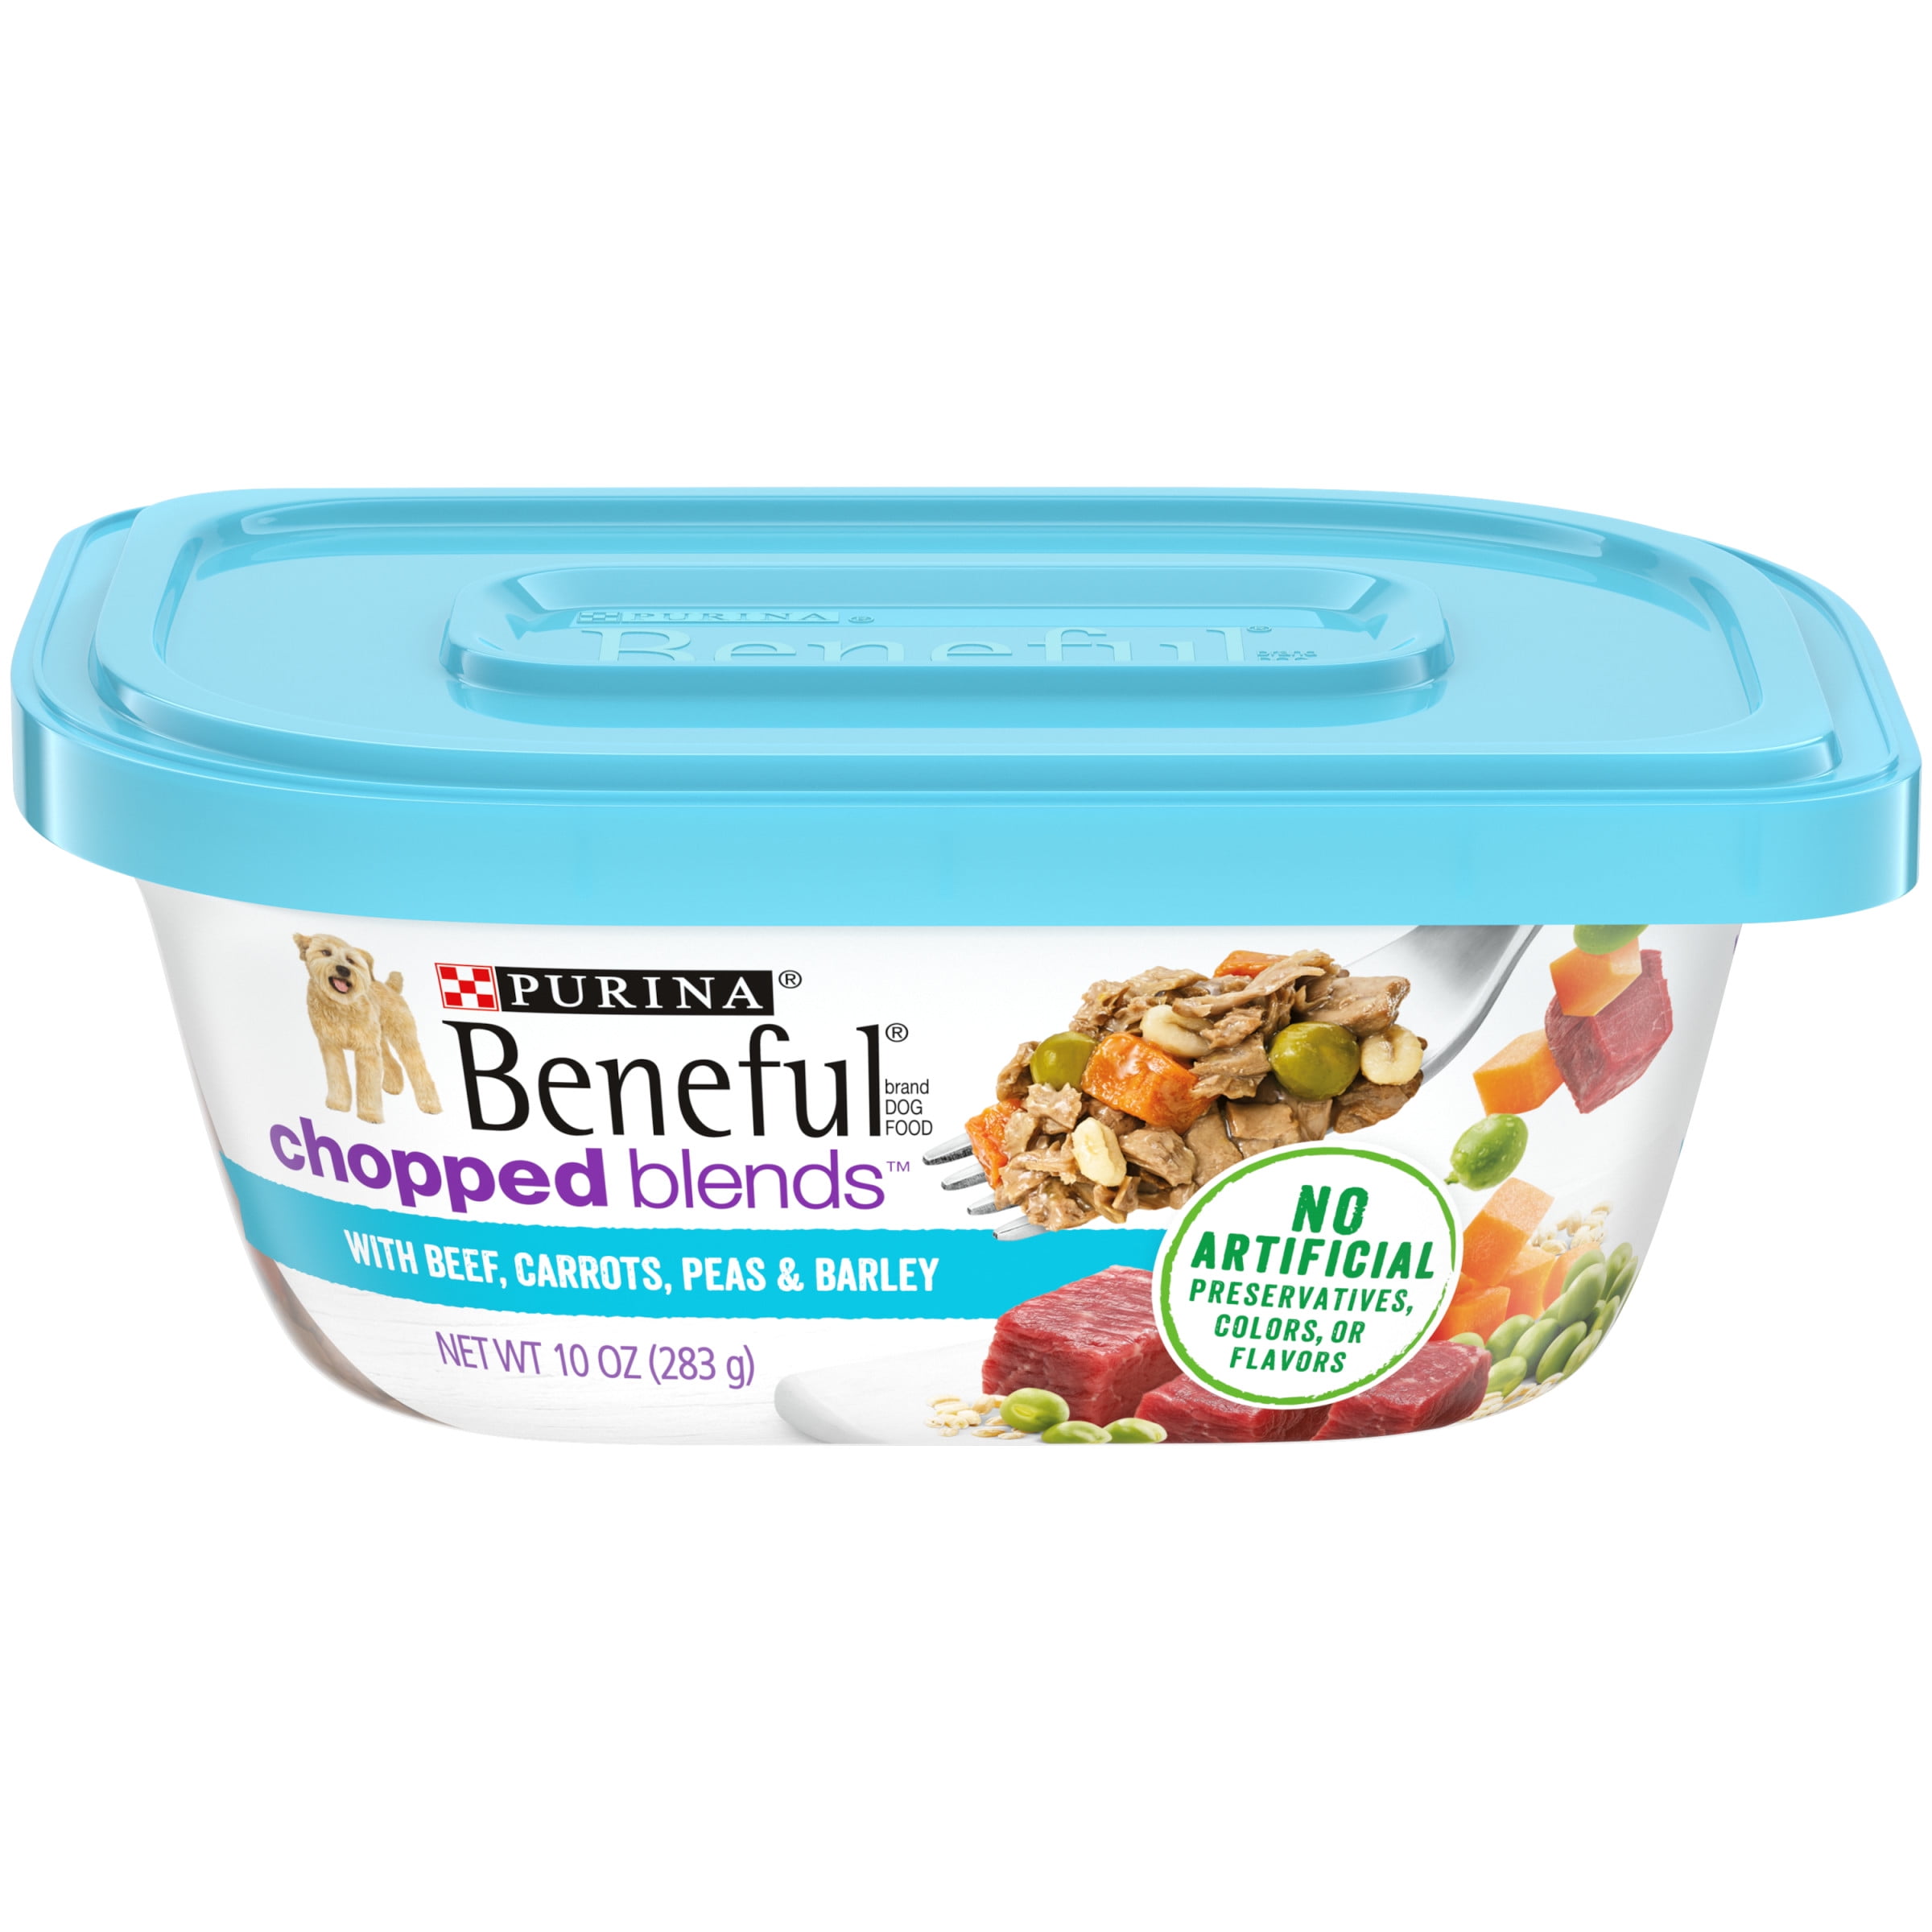 Purina Beneful High Protein Chopped Blends Beef Gravy Wet Dog Food, 10 oz Tub